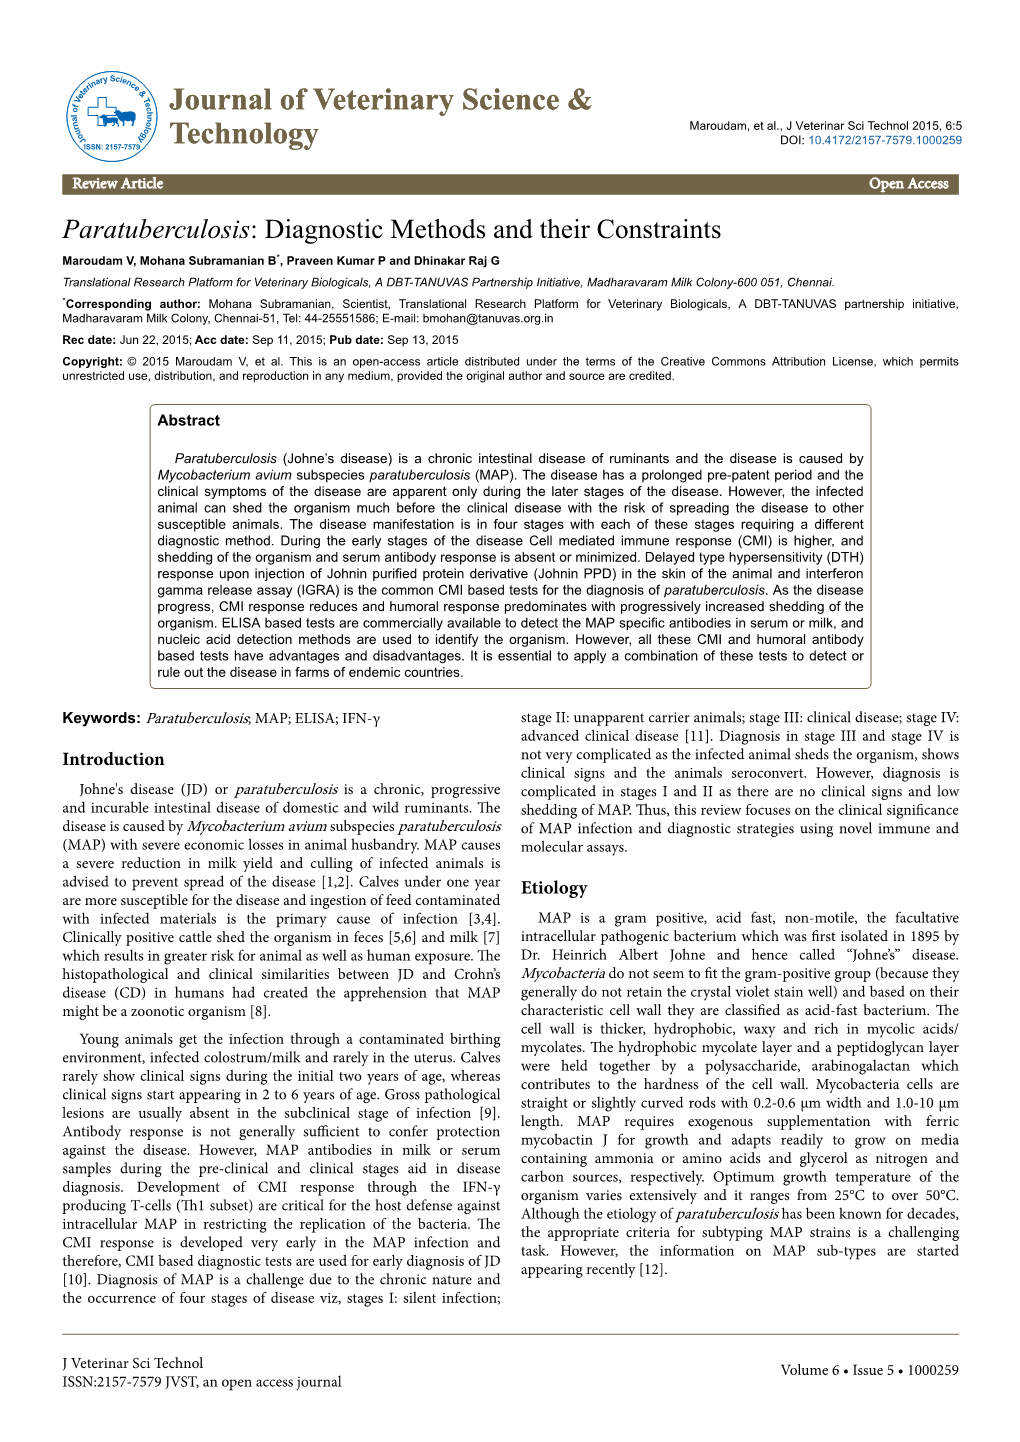 Paratuberculosis: Diagnostic Methods and Their Constraints